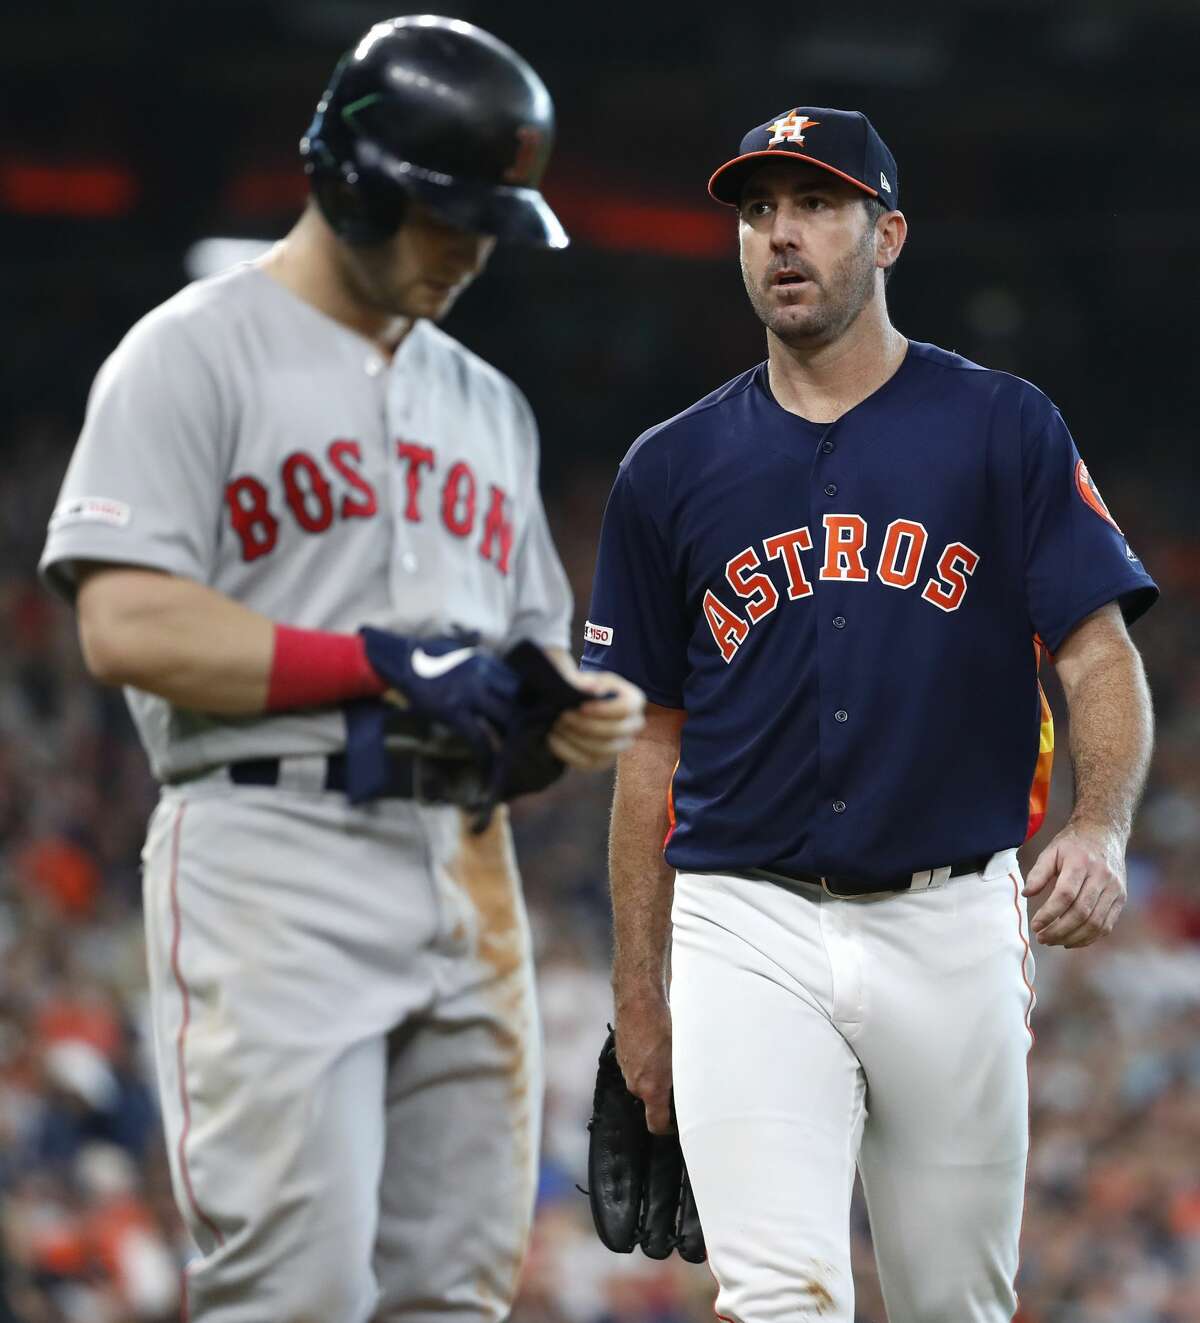 Houston Astros starting pitcher Justin Verlander walks past Boston Red Sox left fielder Andrew Benintendi at the end of the seventh inning of a major league baseball game at Minute Maid Park on Sunday, May 26, 2019, in Houston.